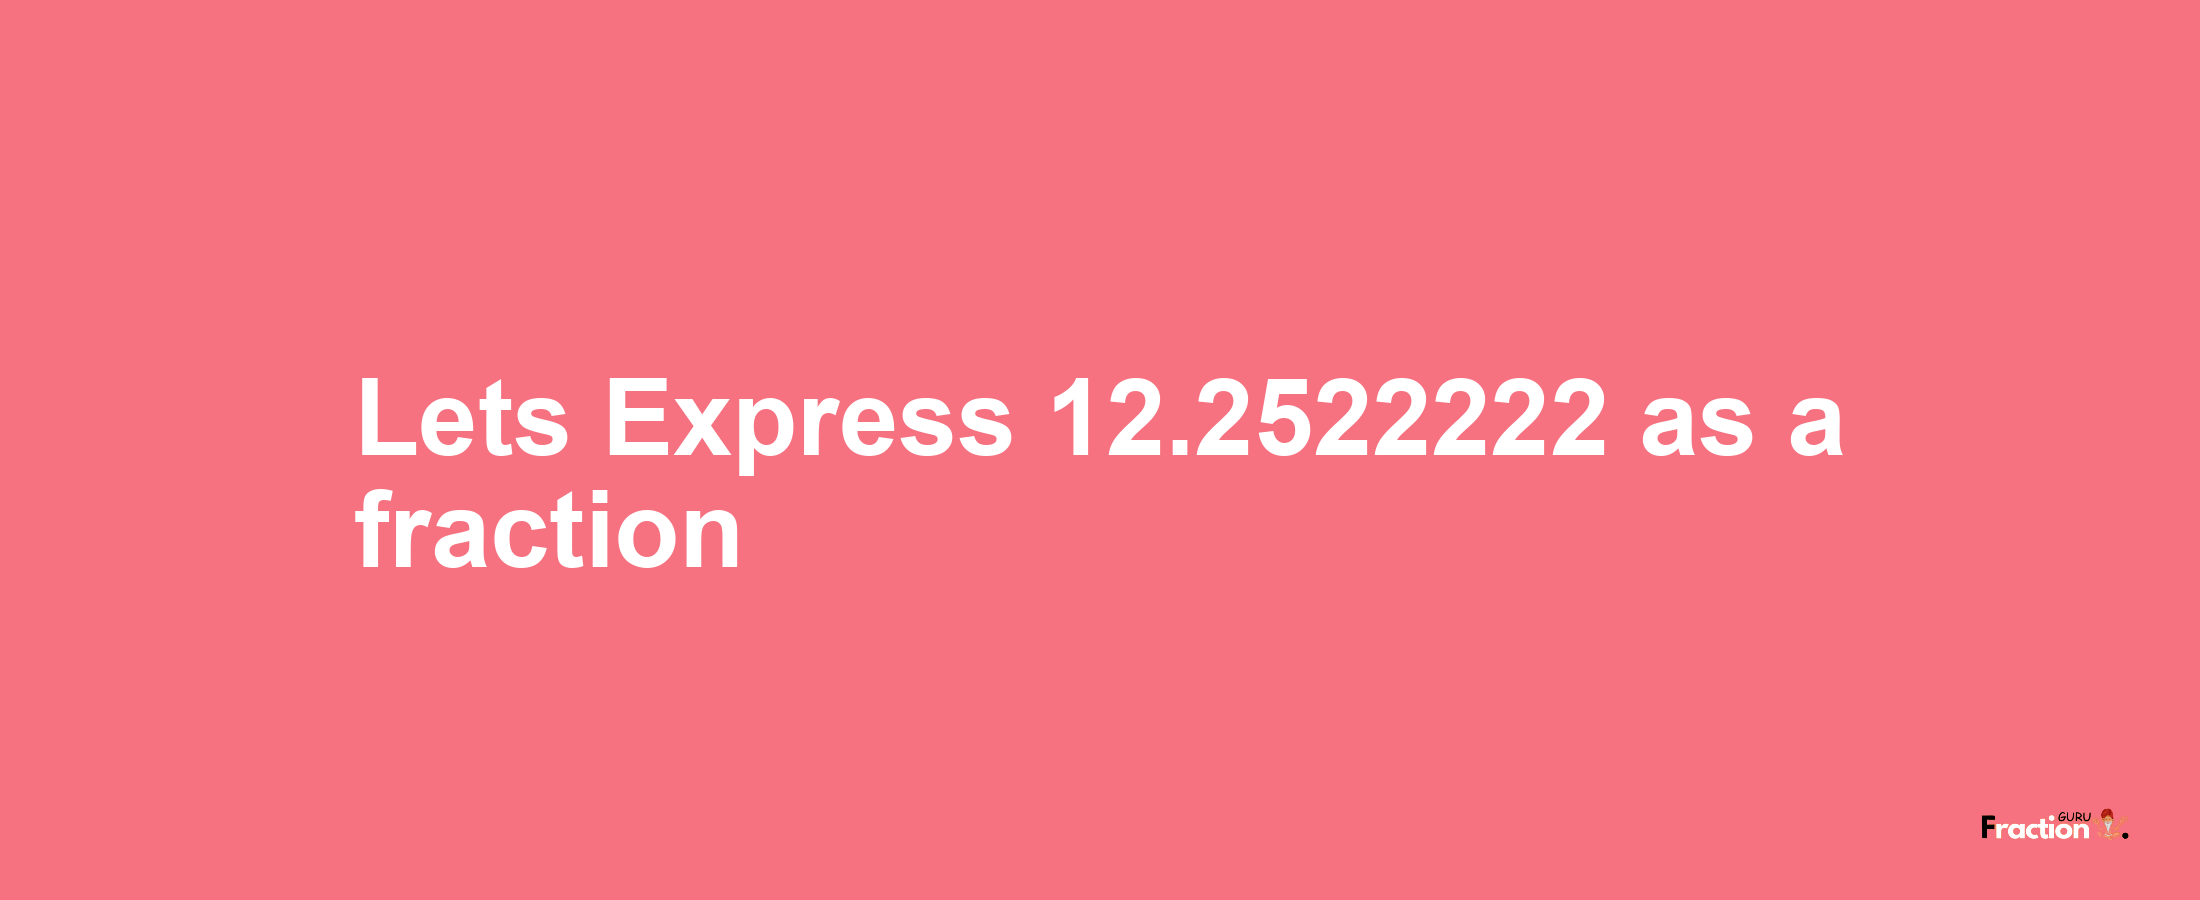 Lets Express 12.2522222 as afraction